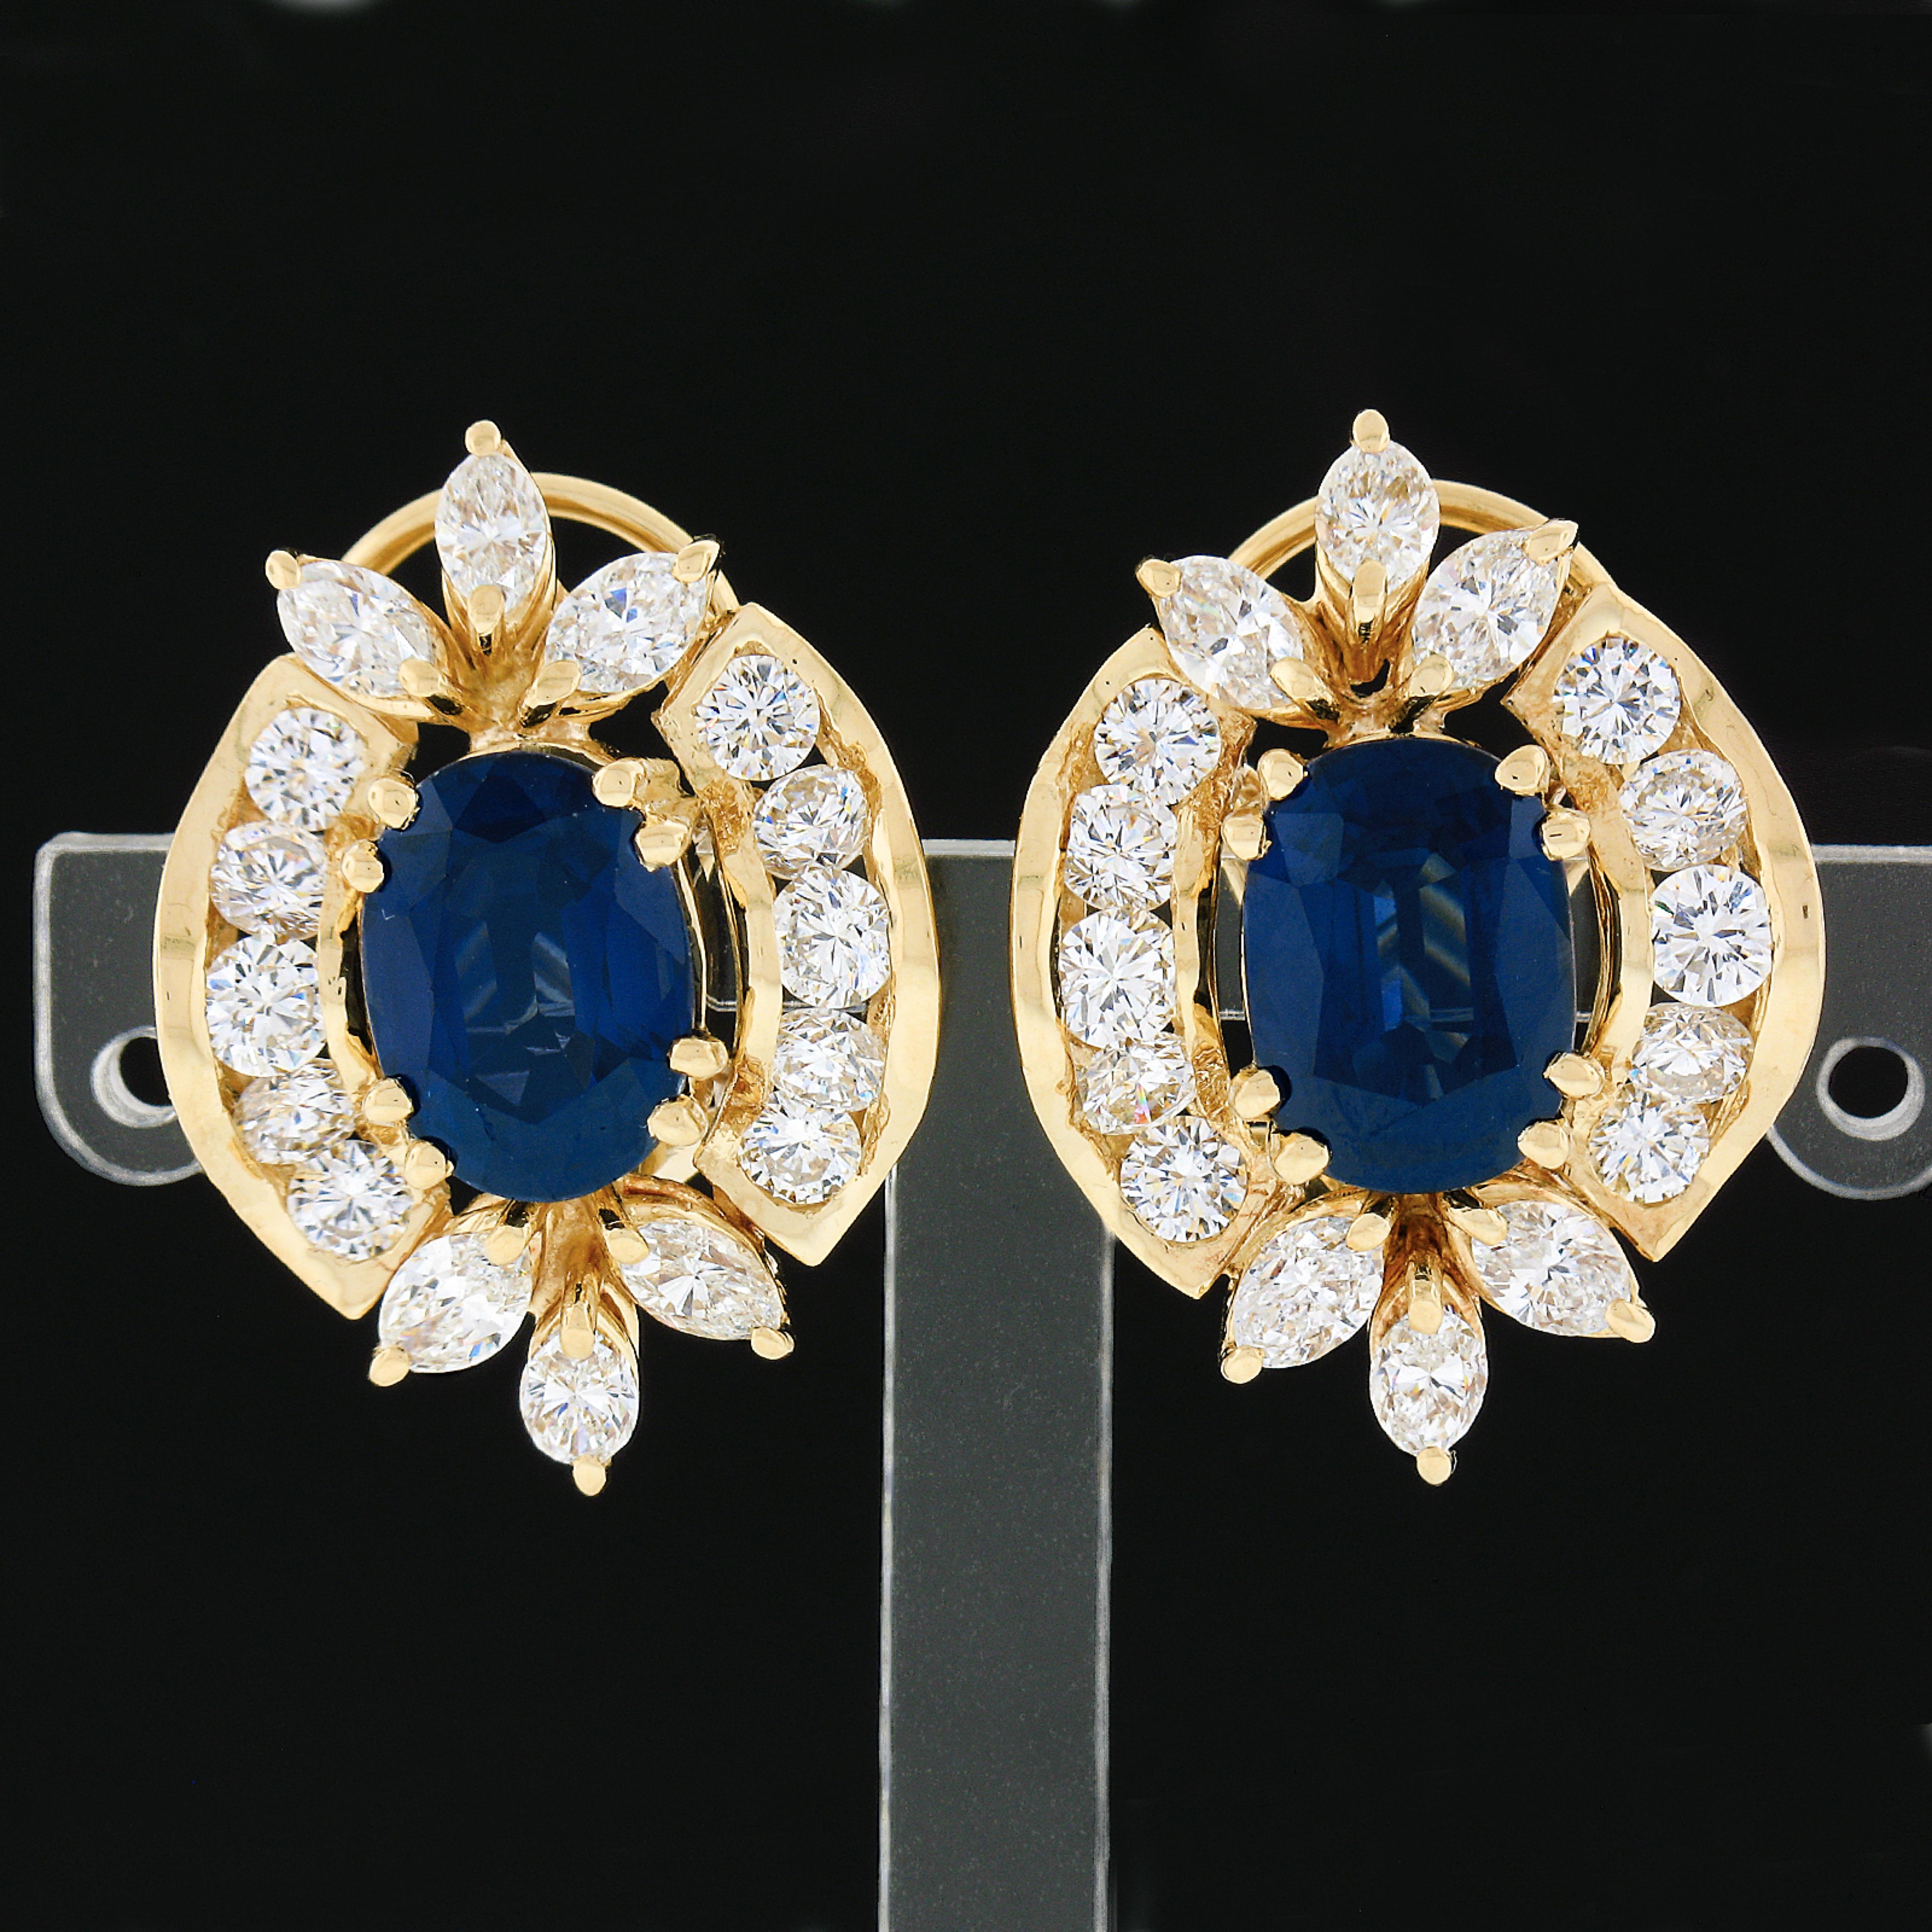 This breathtaking pair of vintage statement earrings is crafted in solid 18k yellow gold and feature very fine oval sapphire stones neatly set at the center surrounded by absolutely stunning diamonds throughout. The large, GIA certified, sapphires